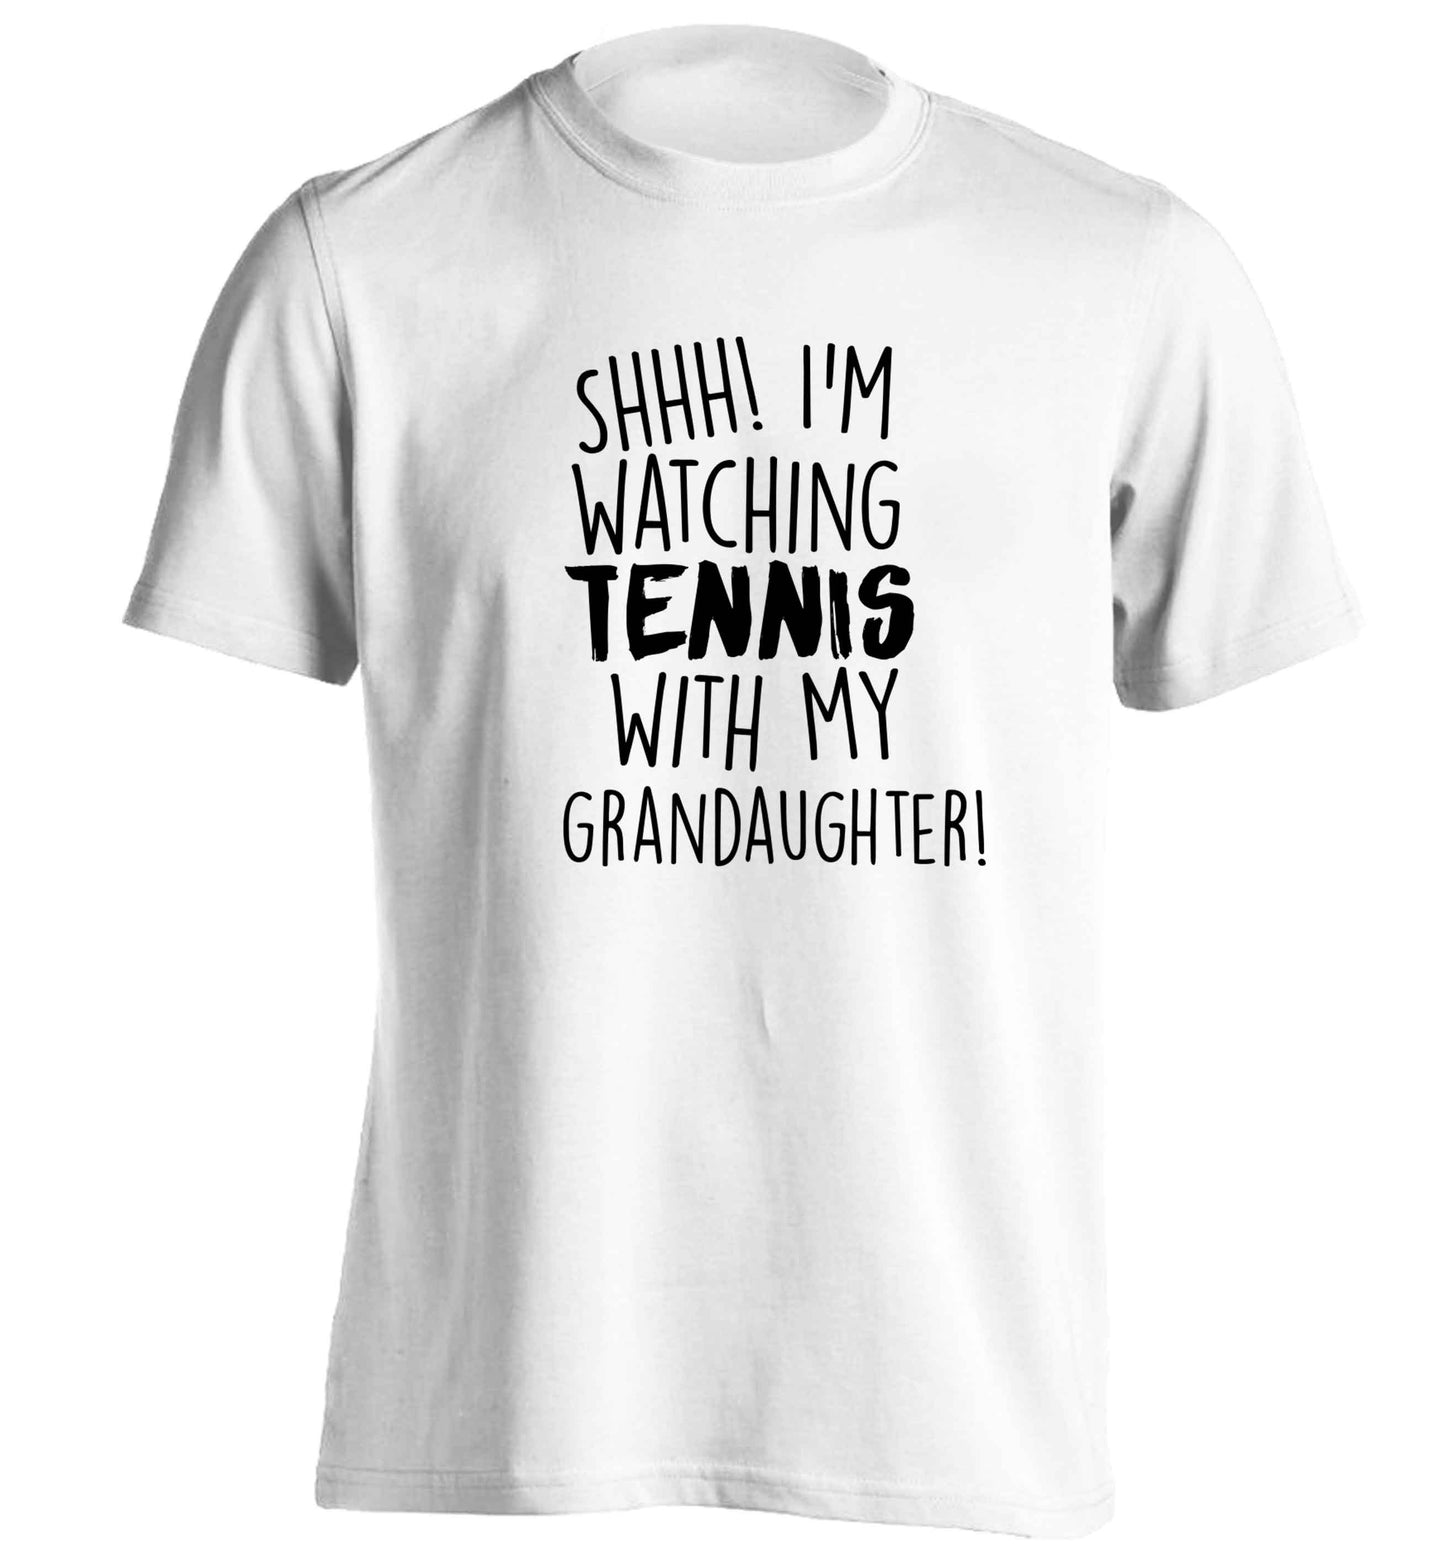 Shh! I'm watching tennis with my granddaughter! adults unisex white Tshirt 2XL